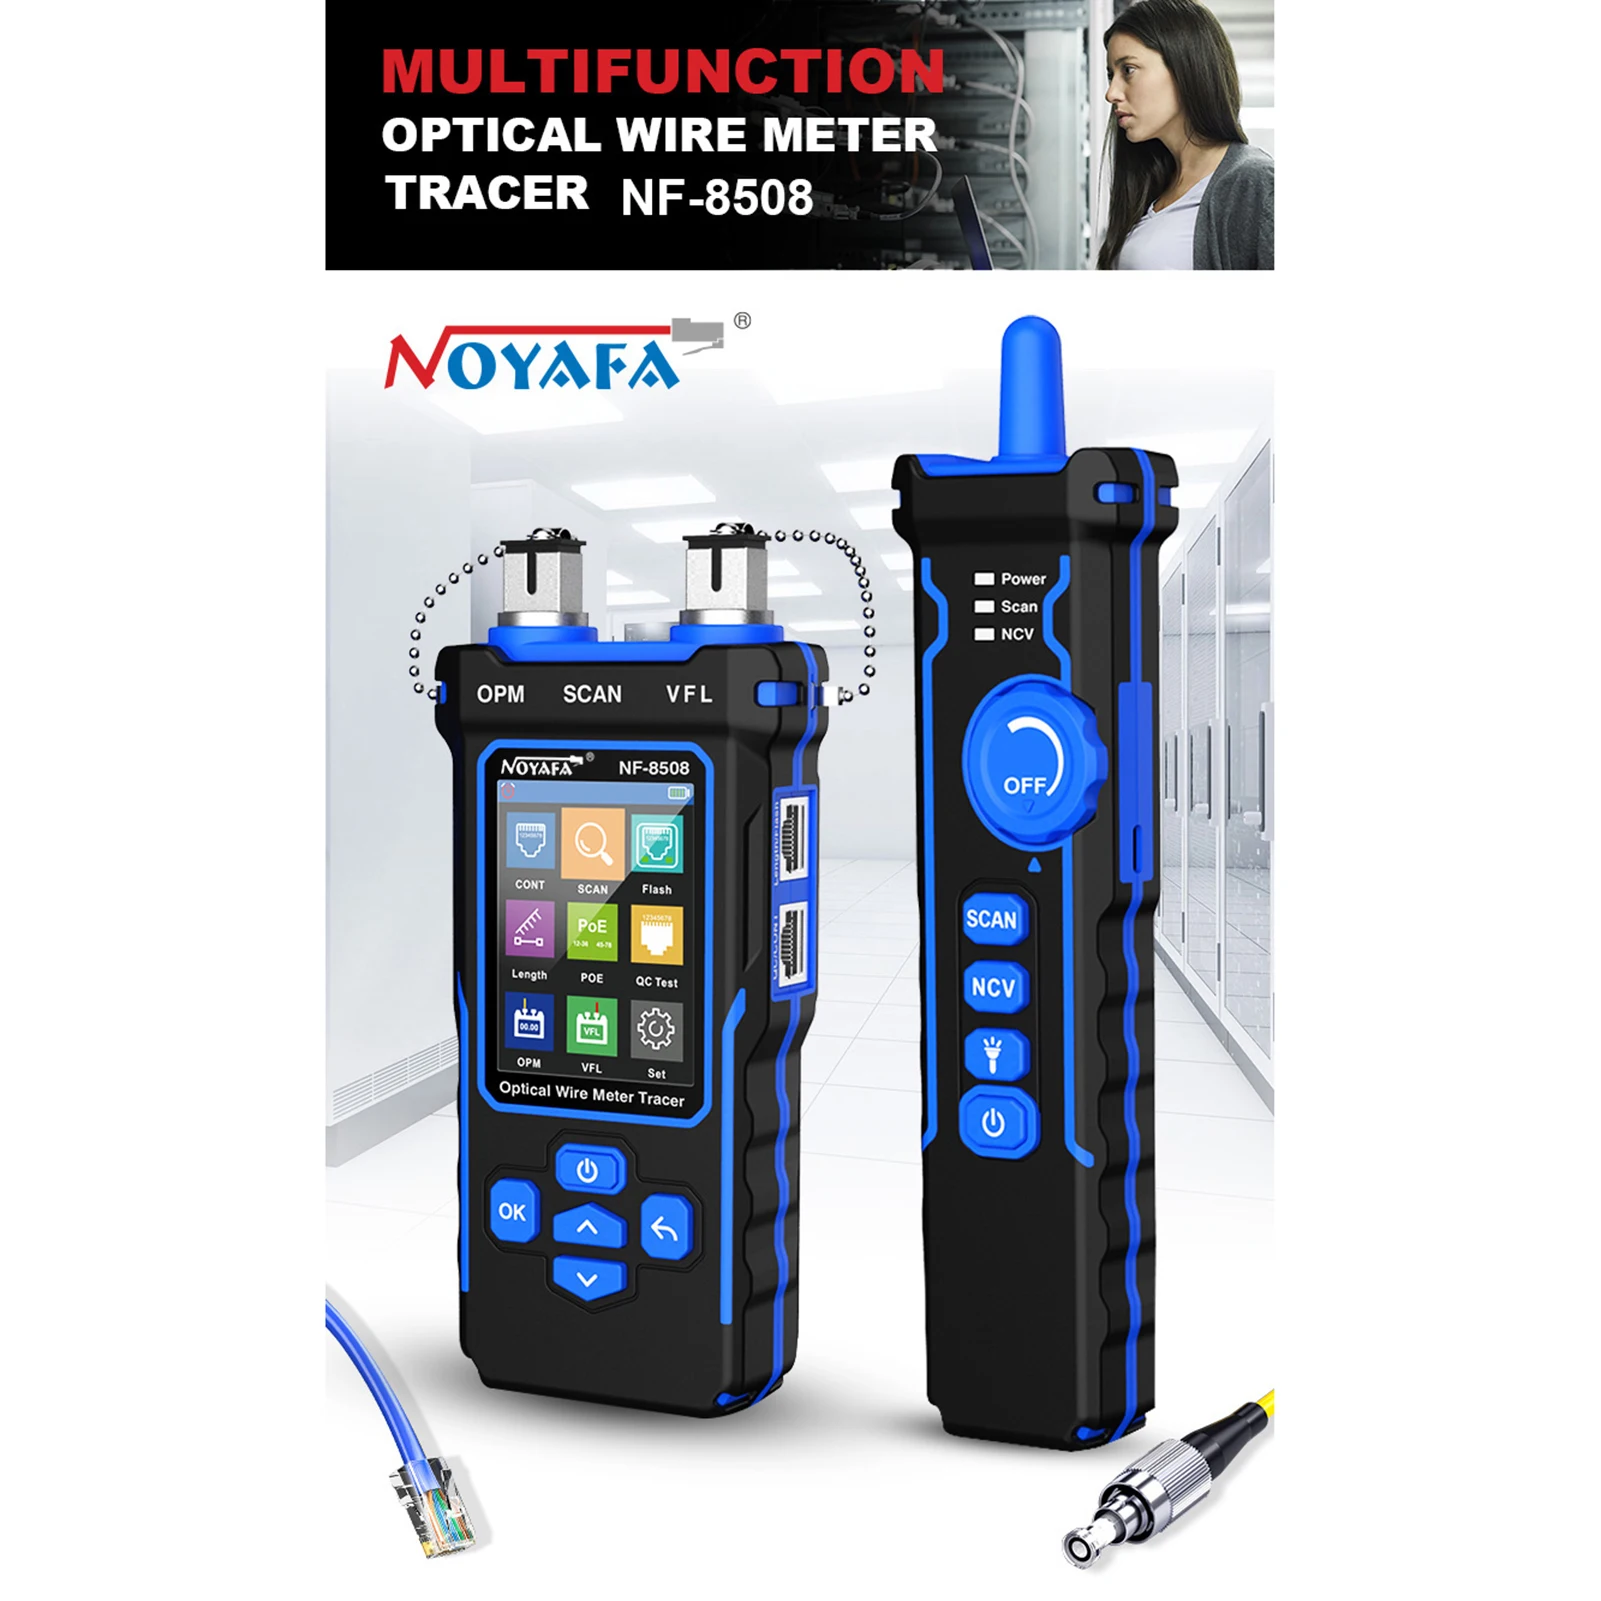 

NOYAFA NF-8508 Optical Wire Meter Tracer LCD Network Cable Tester Rechargeable Network Line Finder Wire Tracker PoE Checker